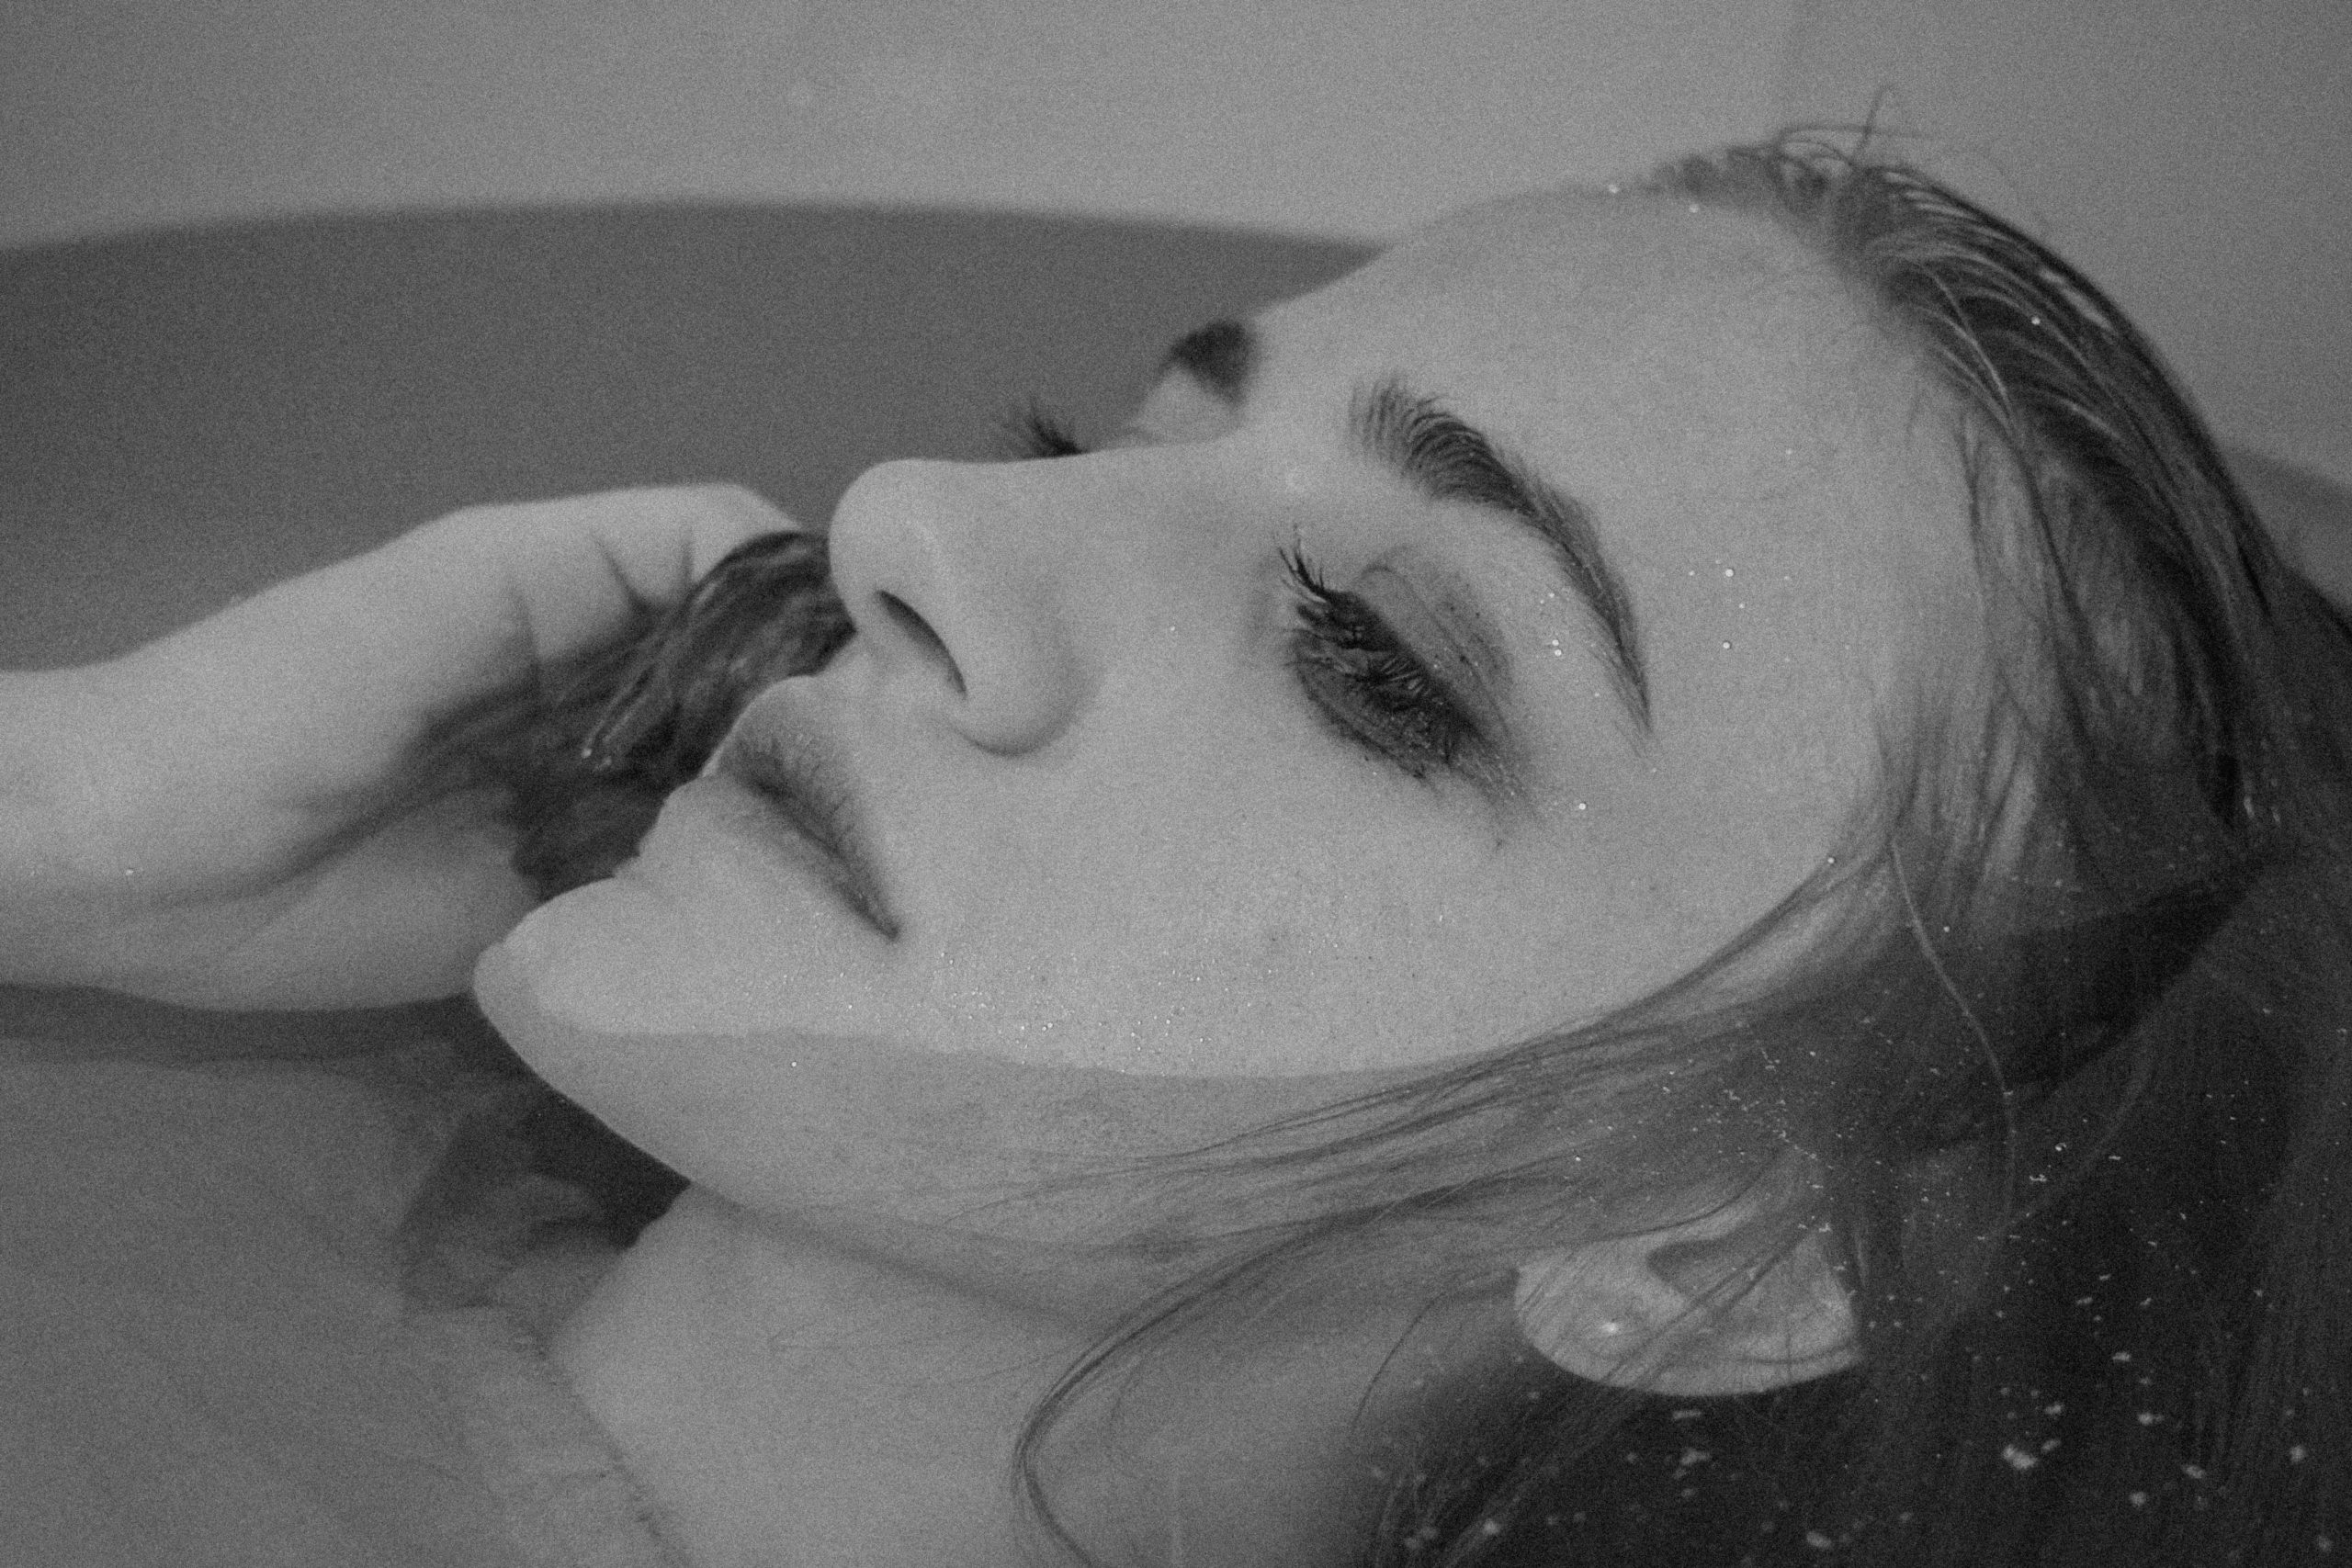 A grescale image of a woman's face half-submerged in a bathtub.